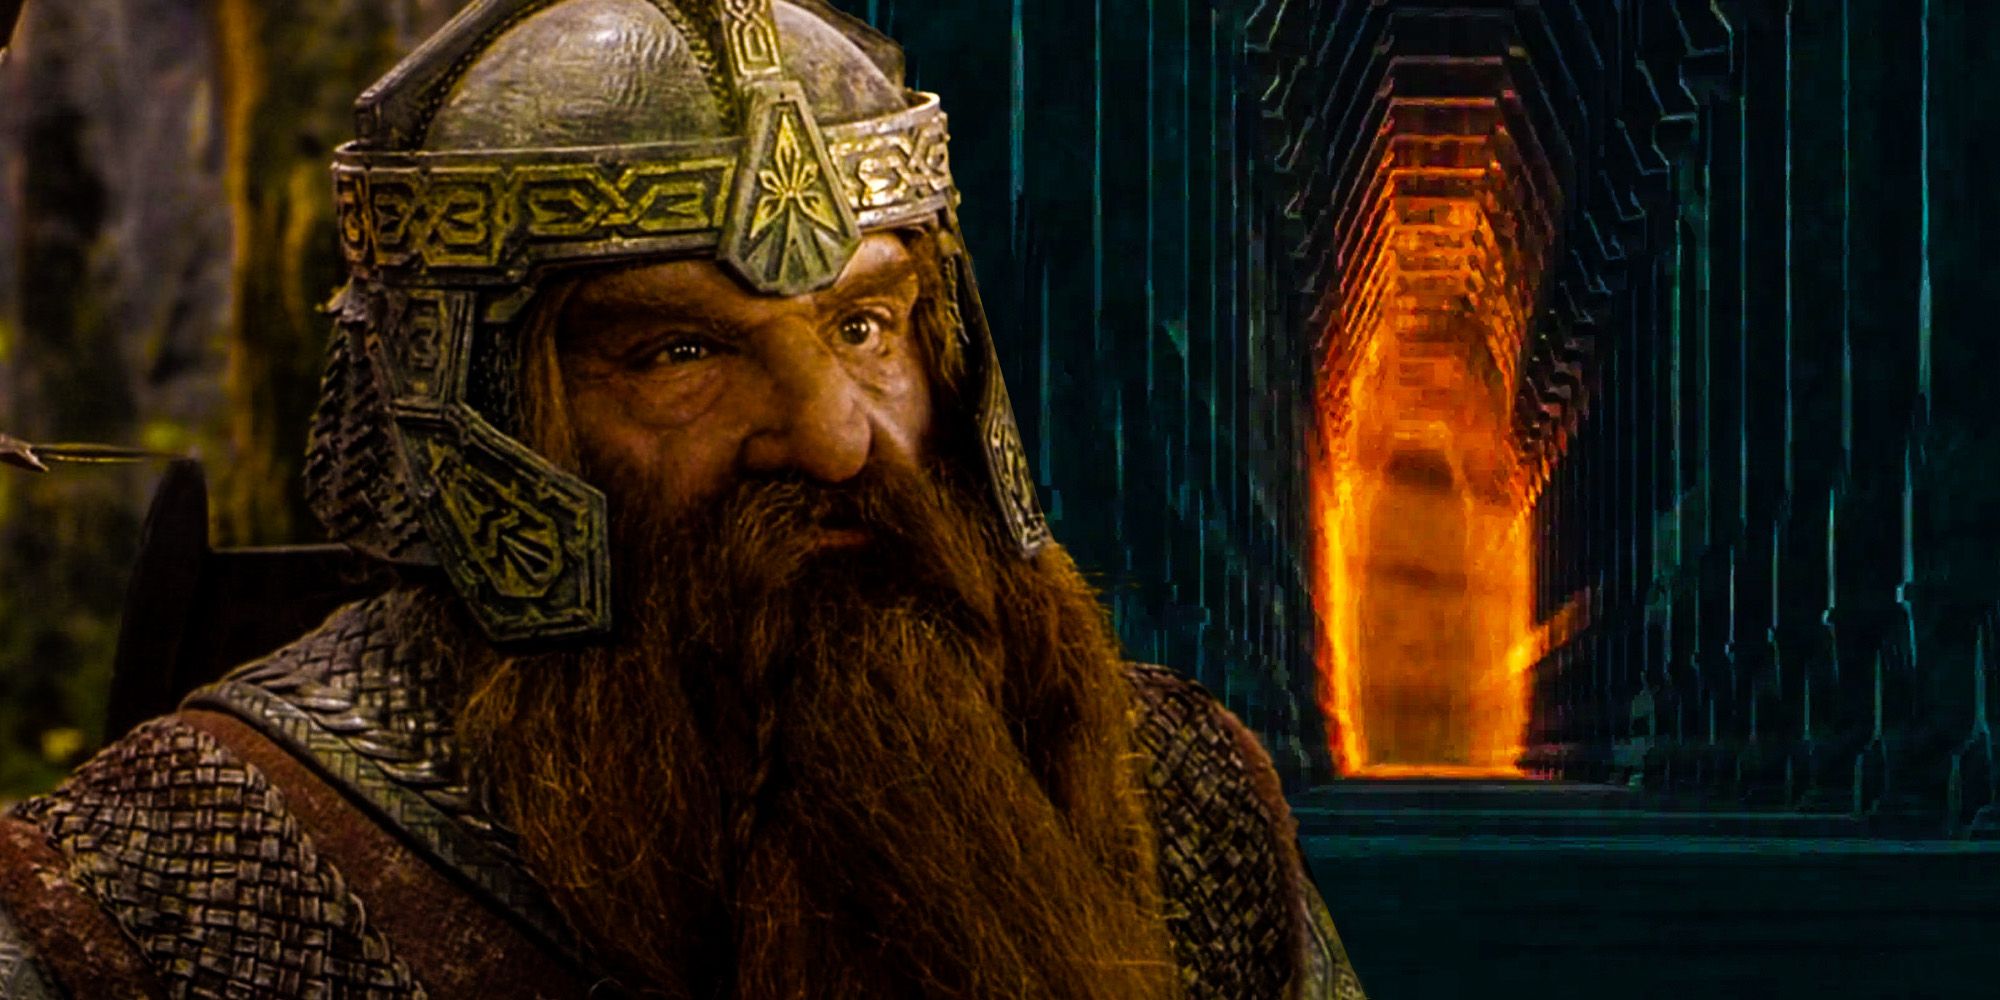 The lord of the Rings the fellowship of the ring dwarves Gimli Mines of Moria